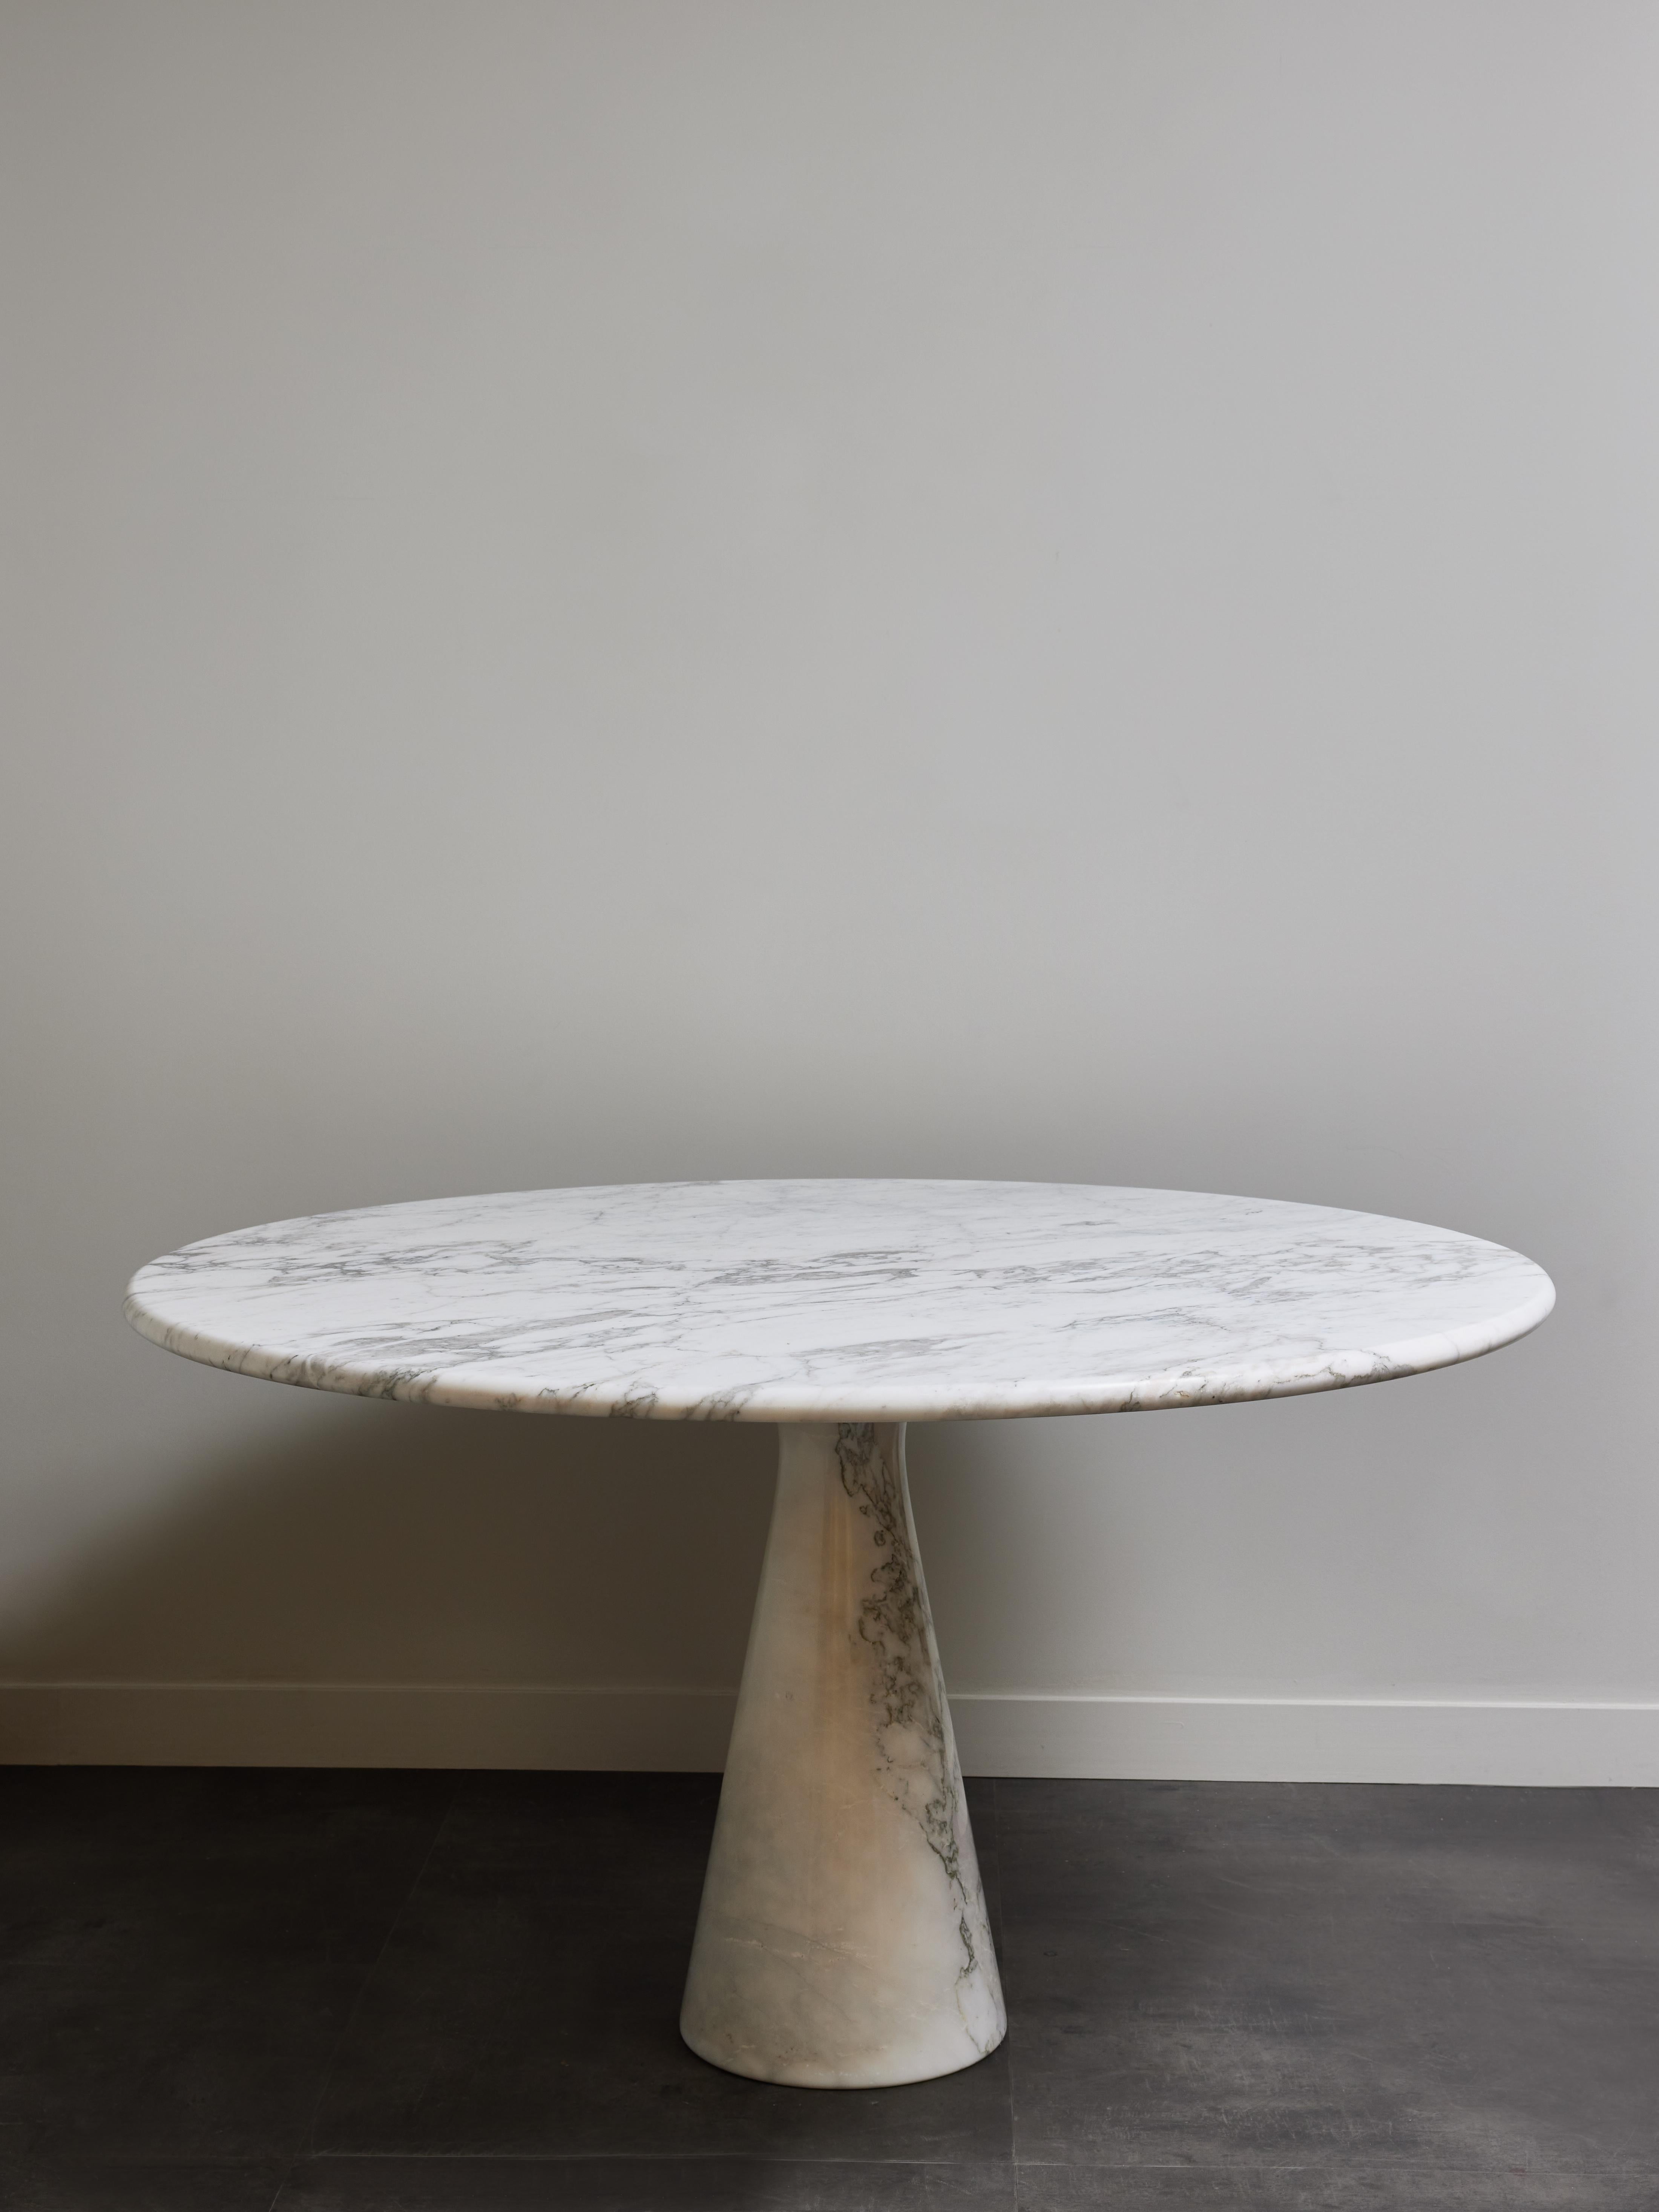 White marble gueridon designed  by Angelo Mangiarotti in the 1970s.

Can be used either as a presentation table or a dining table as it comfortably sits six persons.

